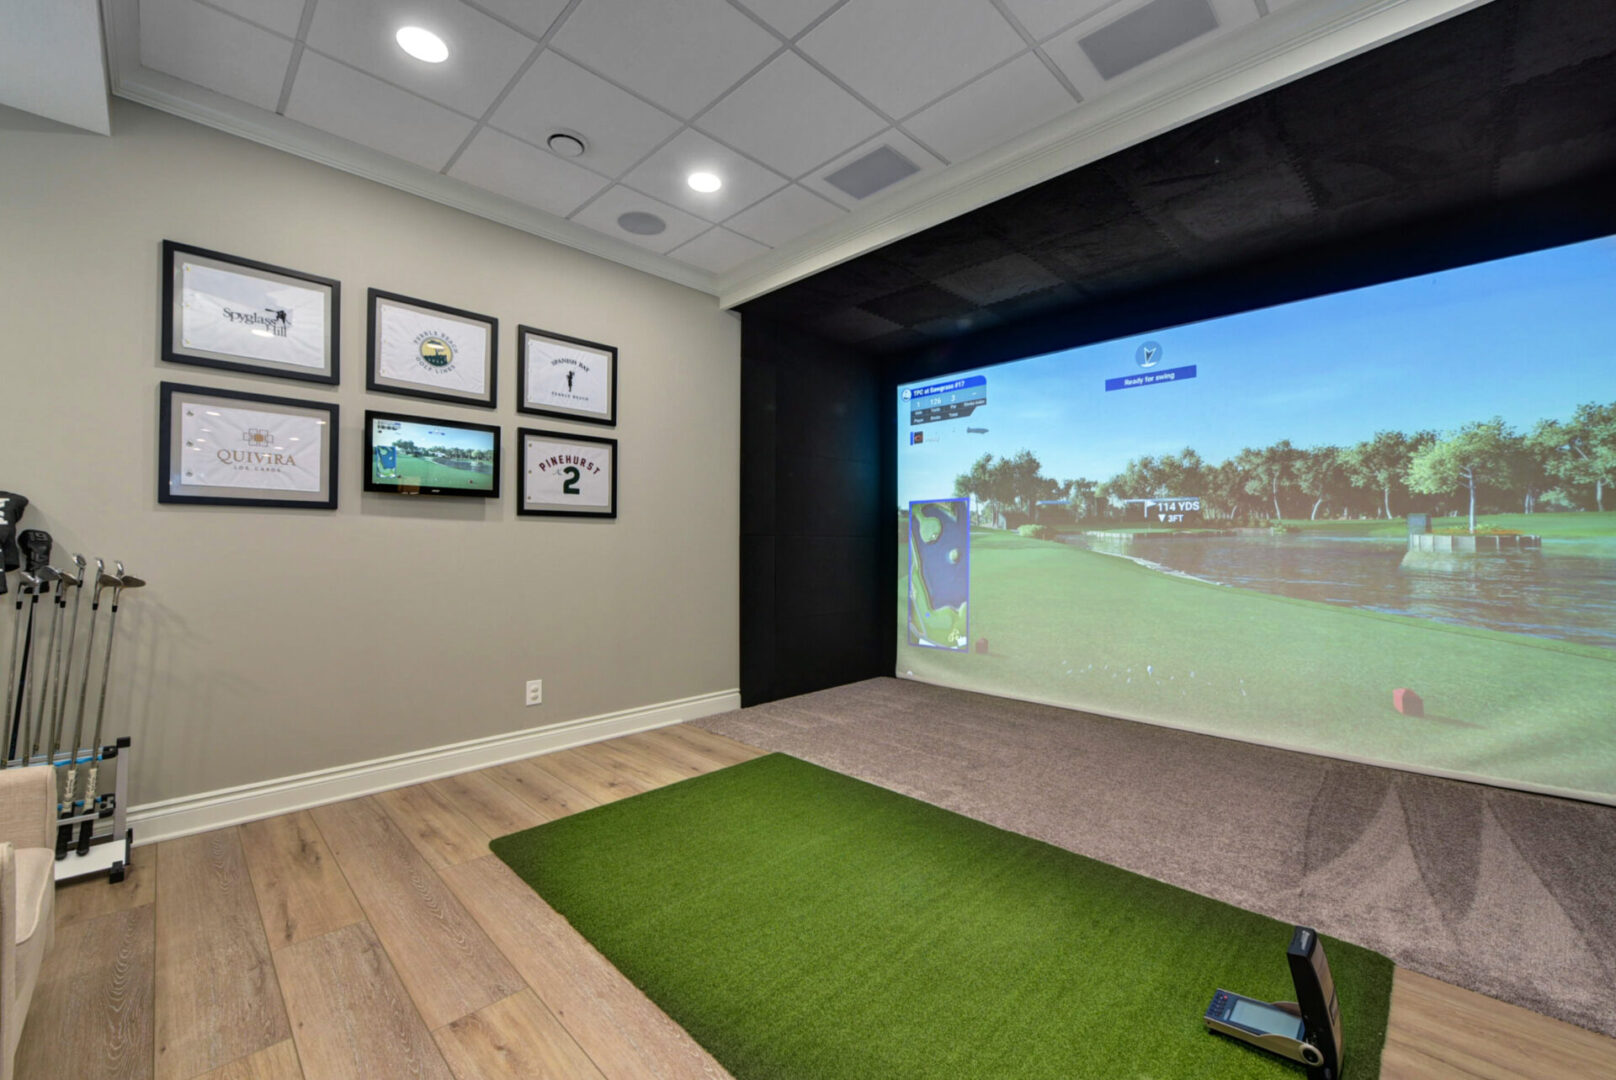 A room in a house with a golf playing arangement.